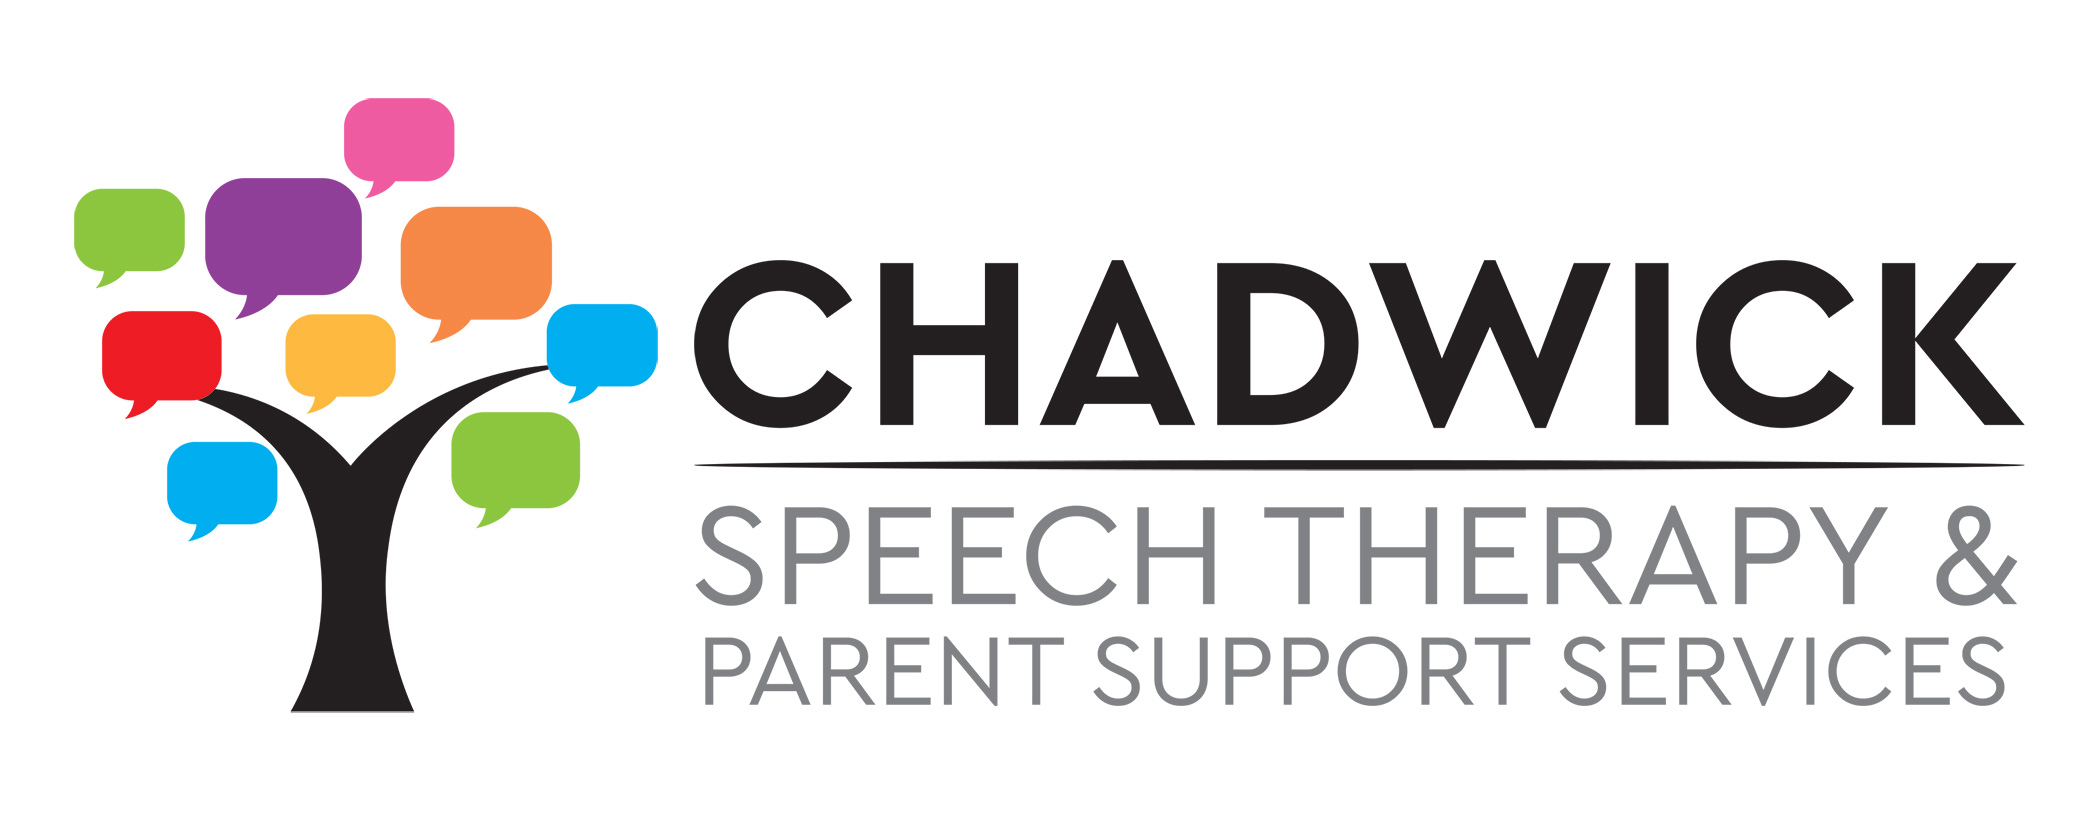 Chadwick-Speech-Therapy-Parent-Support-Services.jpg